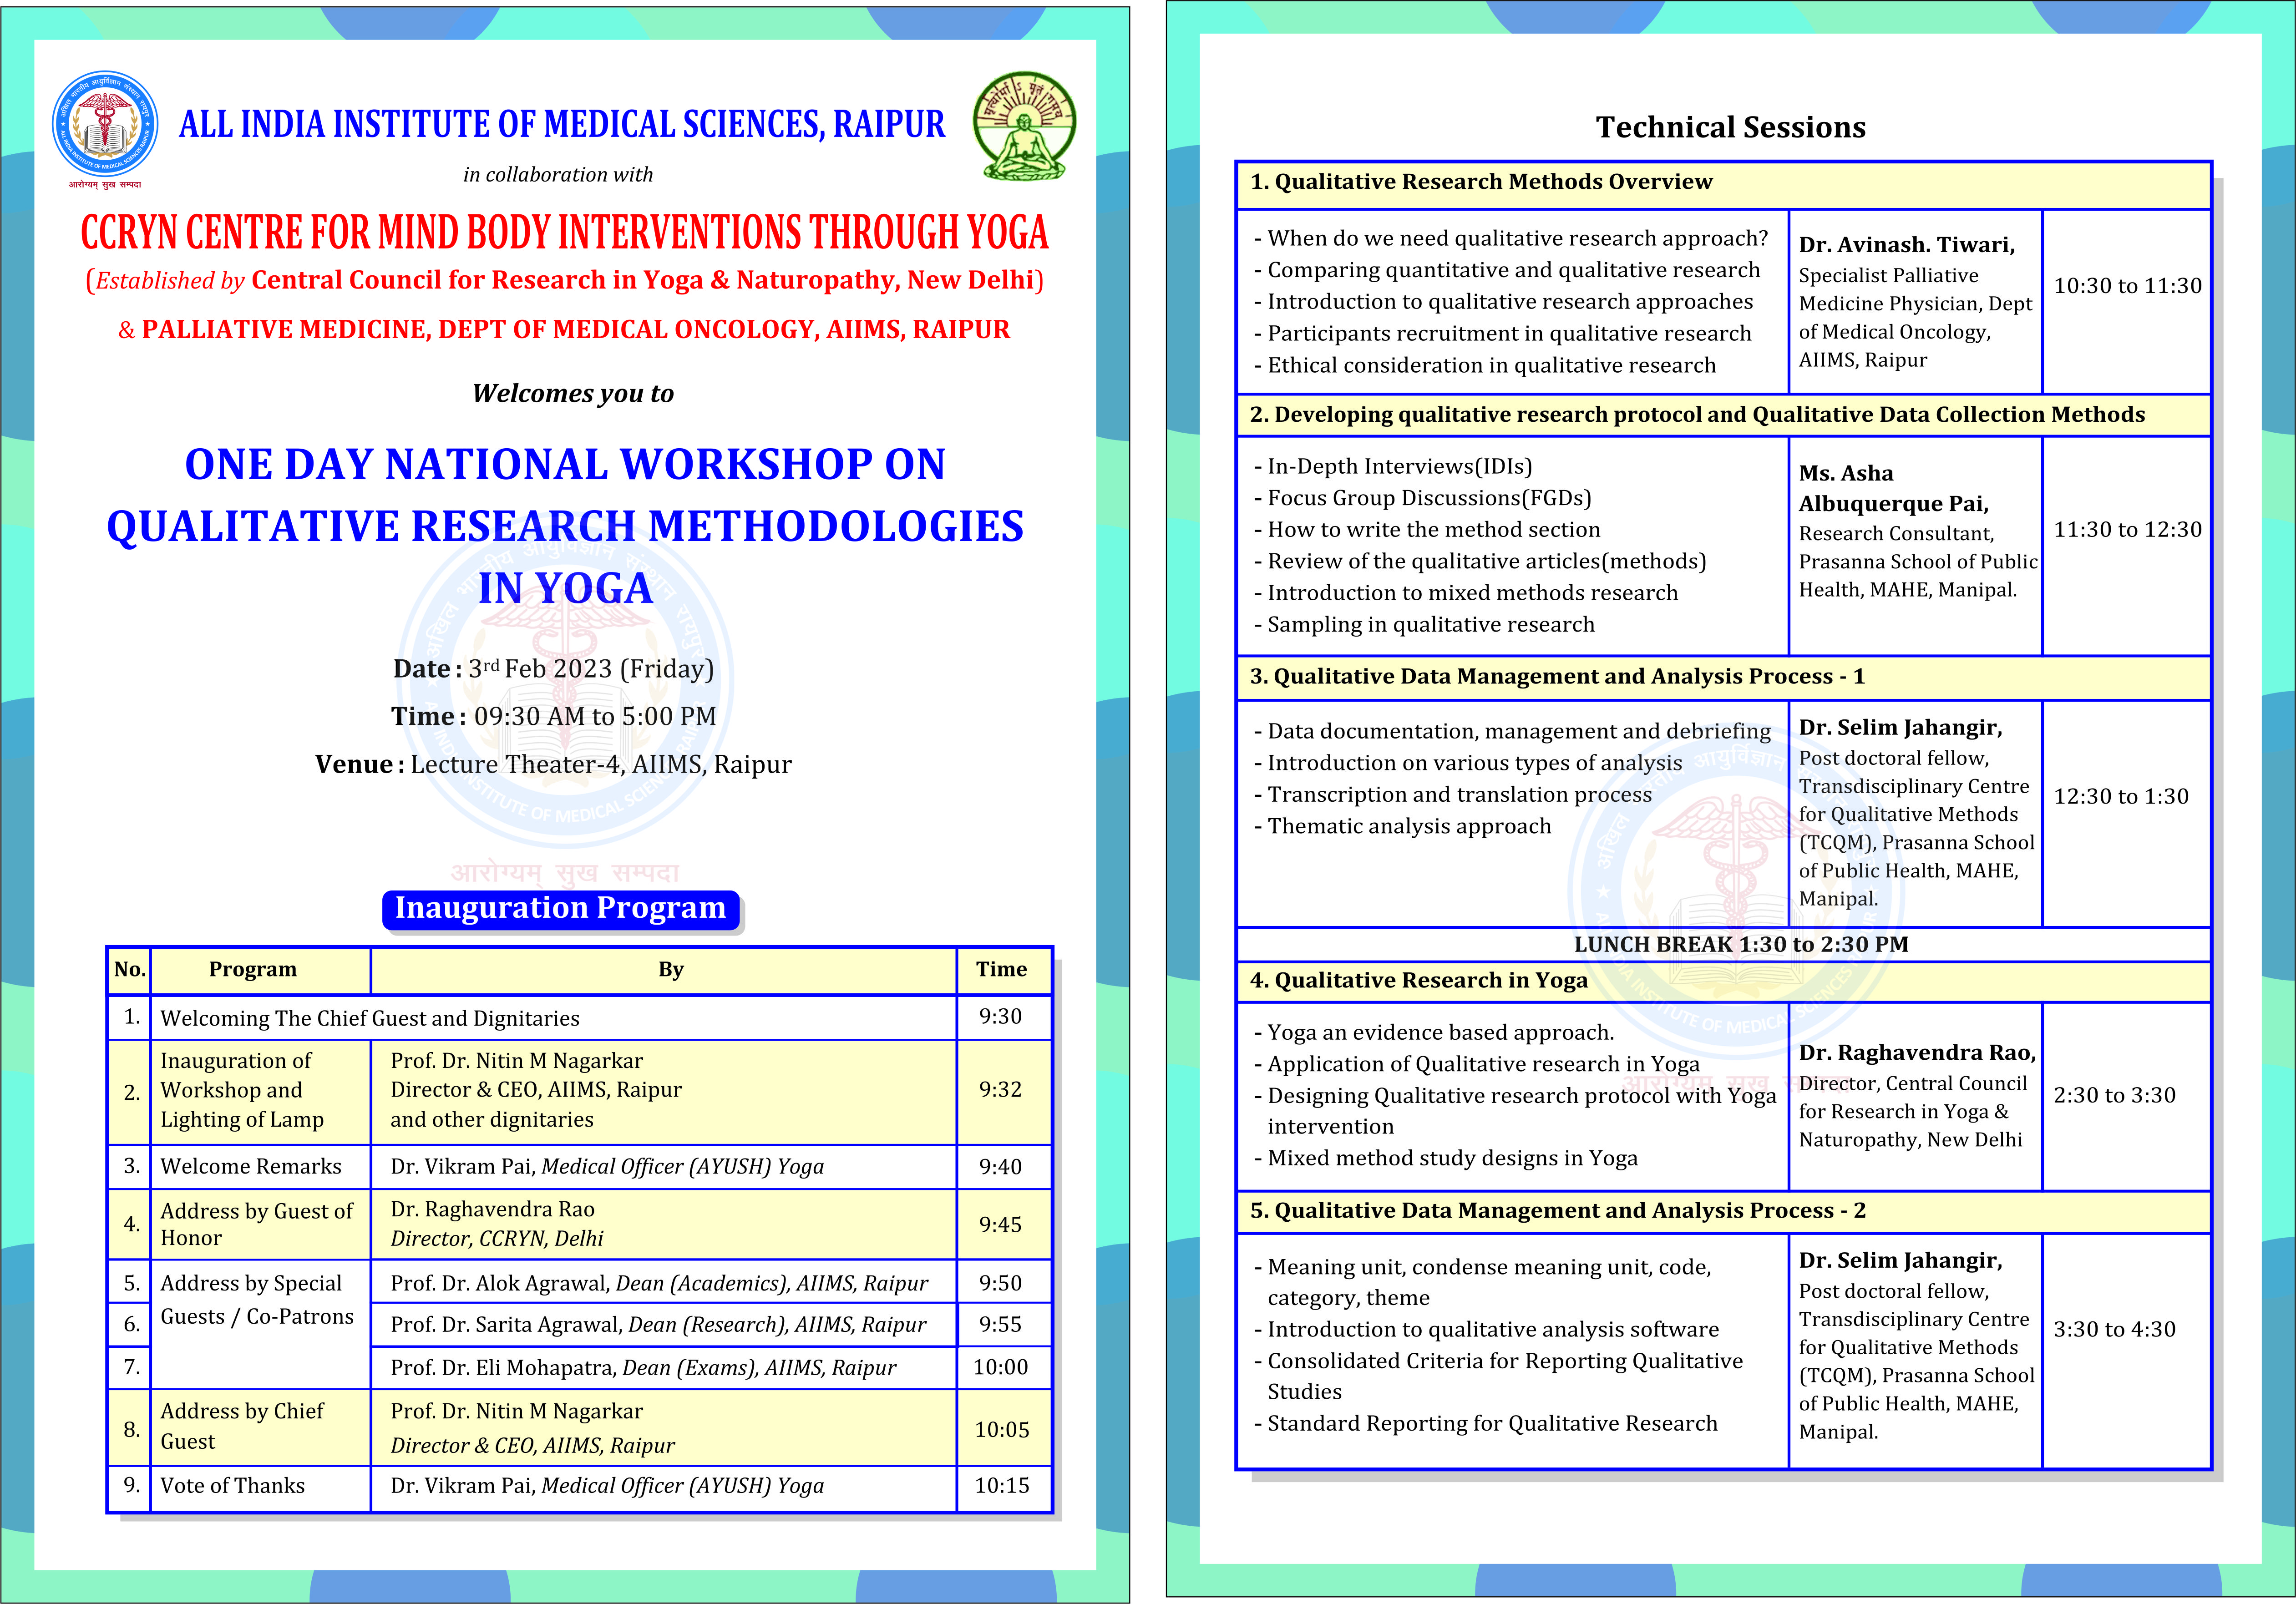 One day National workshop on Qualitative Research Methodologies in Yoga on Feb 3rd 2023 (Friday) at AIIMS, Raipur.